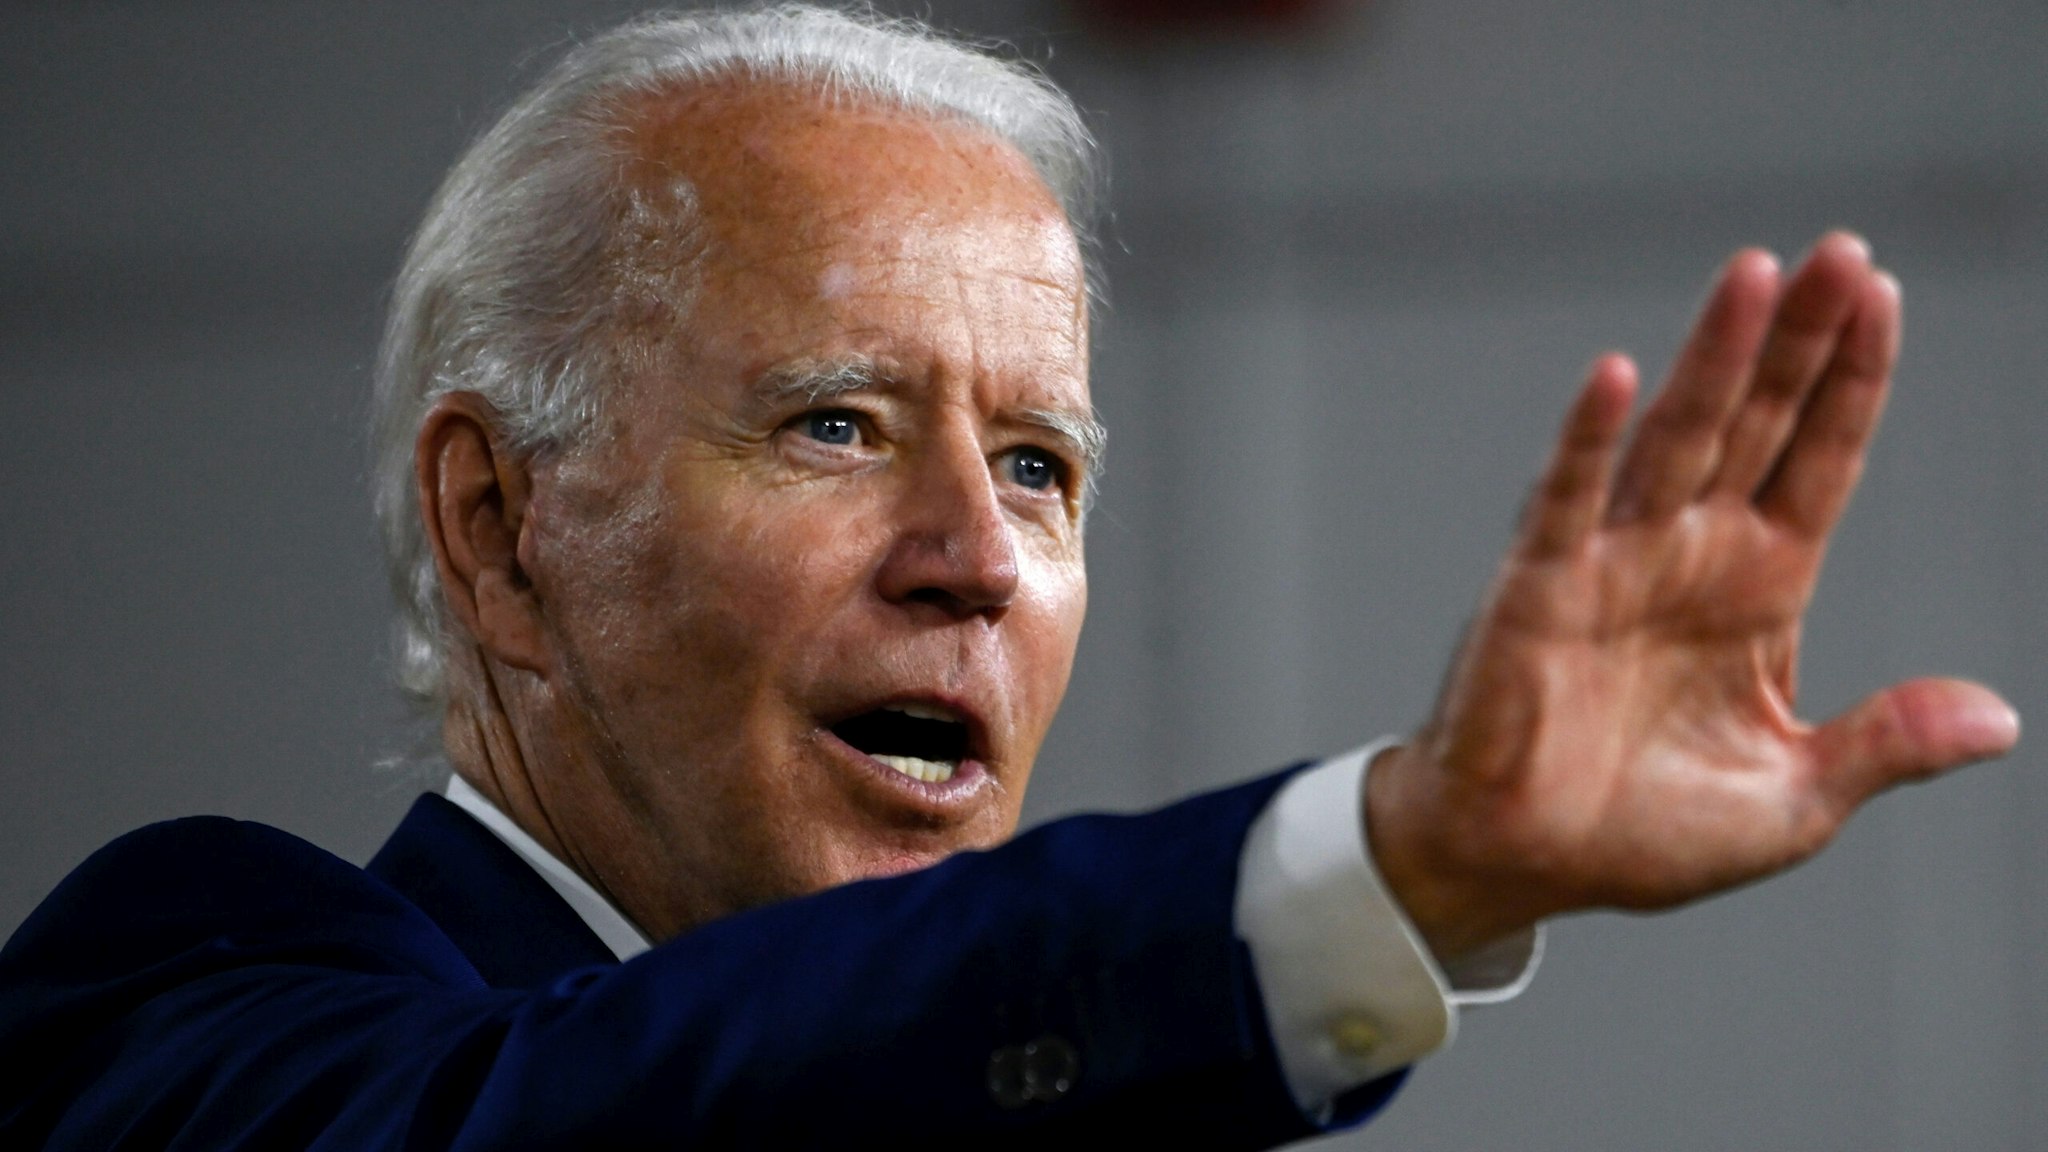 US Democratic presidential candidate and former Vice President Joe Biden speaks during a campaign event at the William "Hicks" Anderson Community Center in Wilmington, Delaware on July 28, 2020.